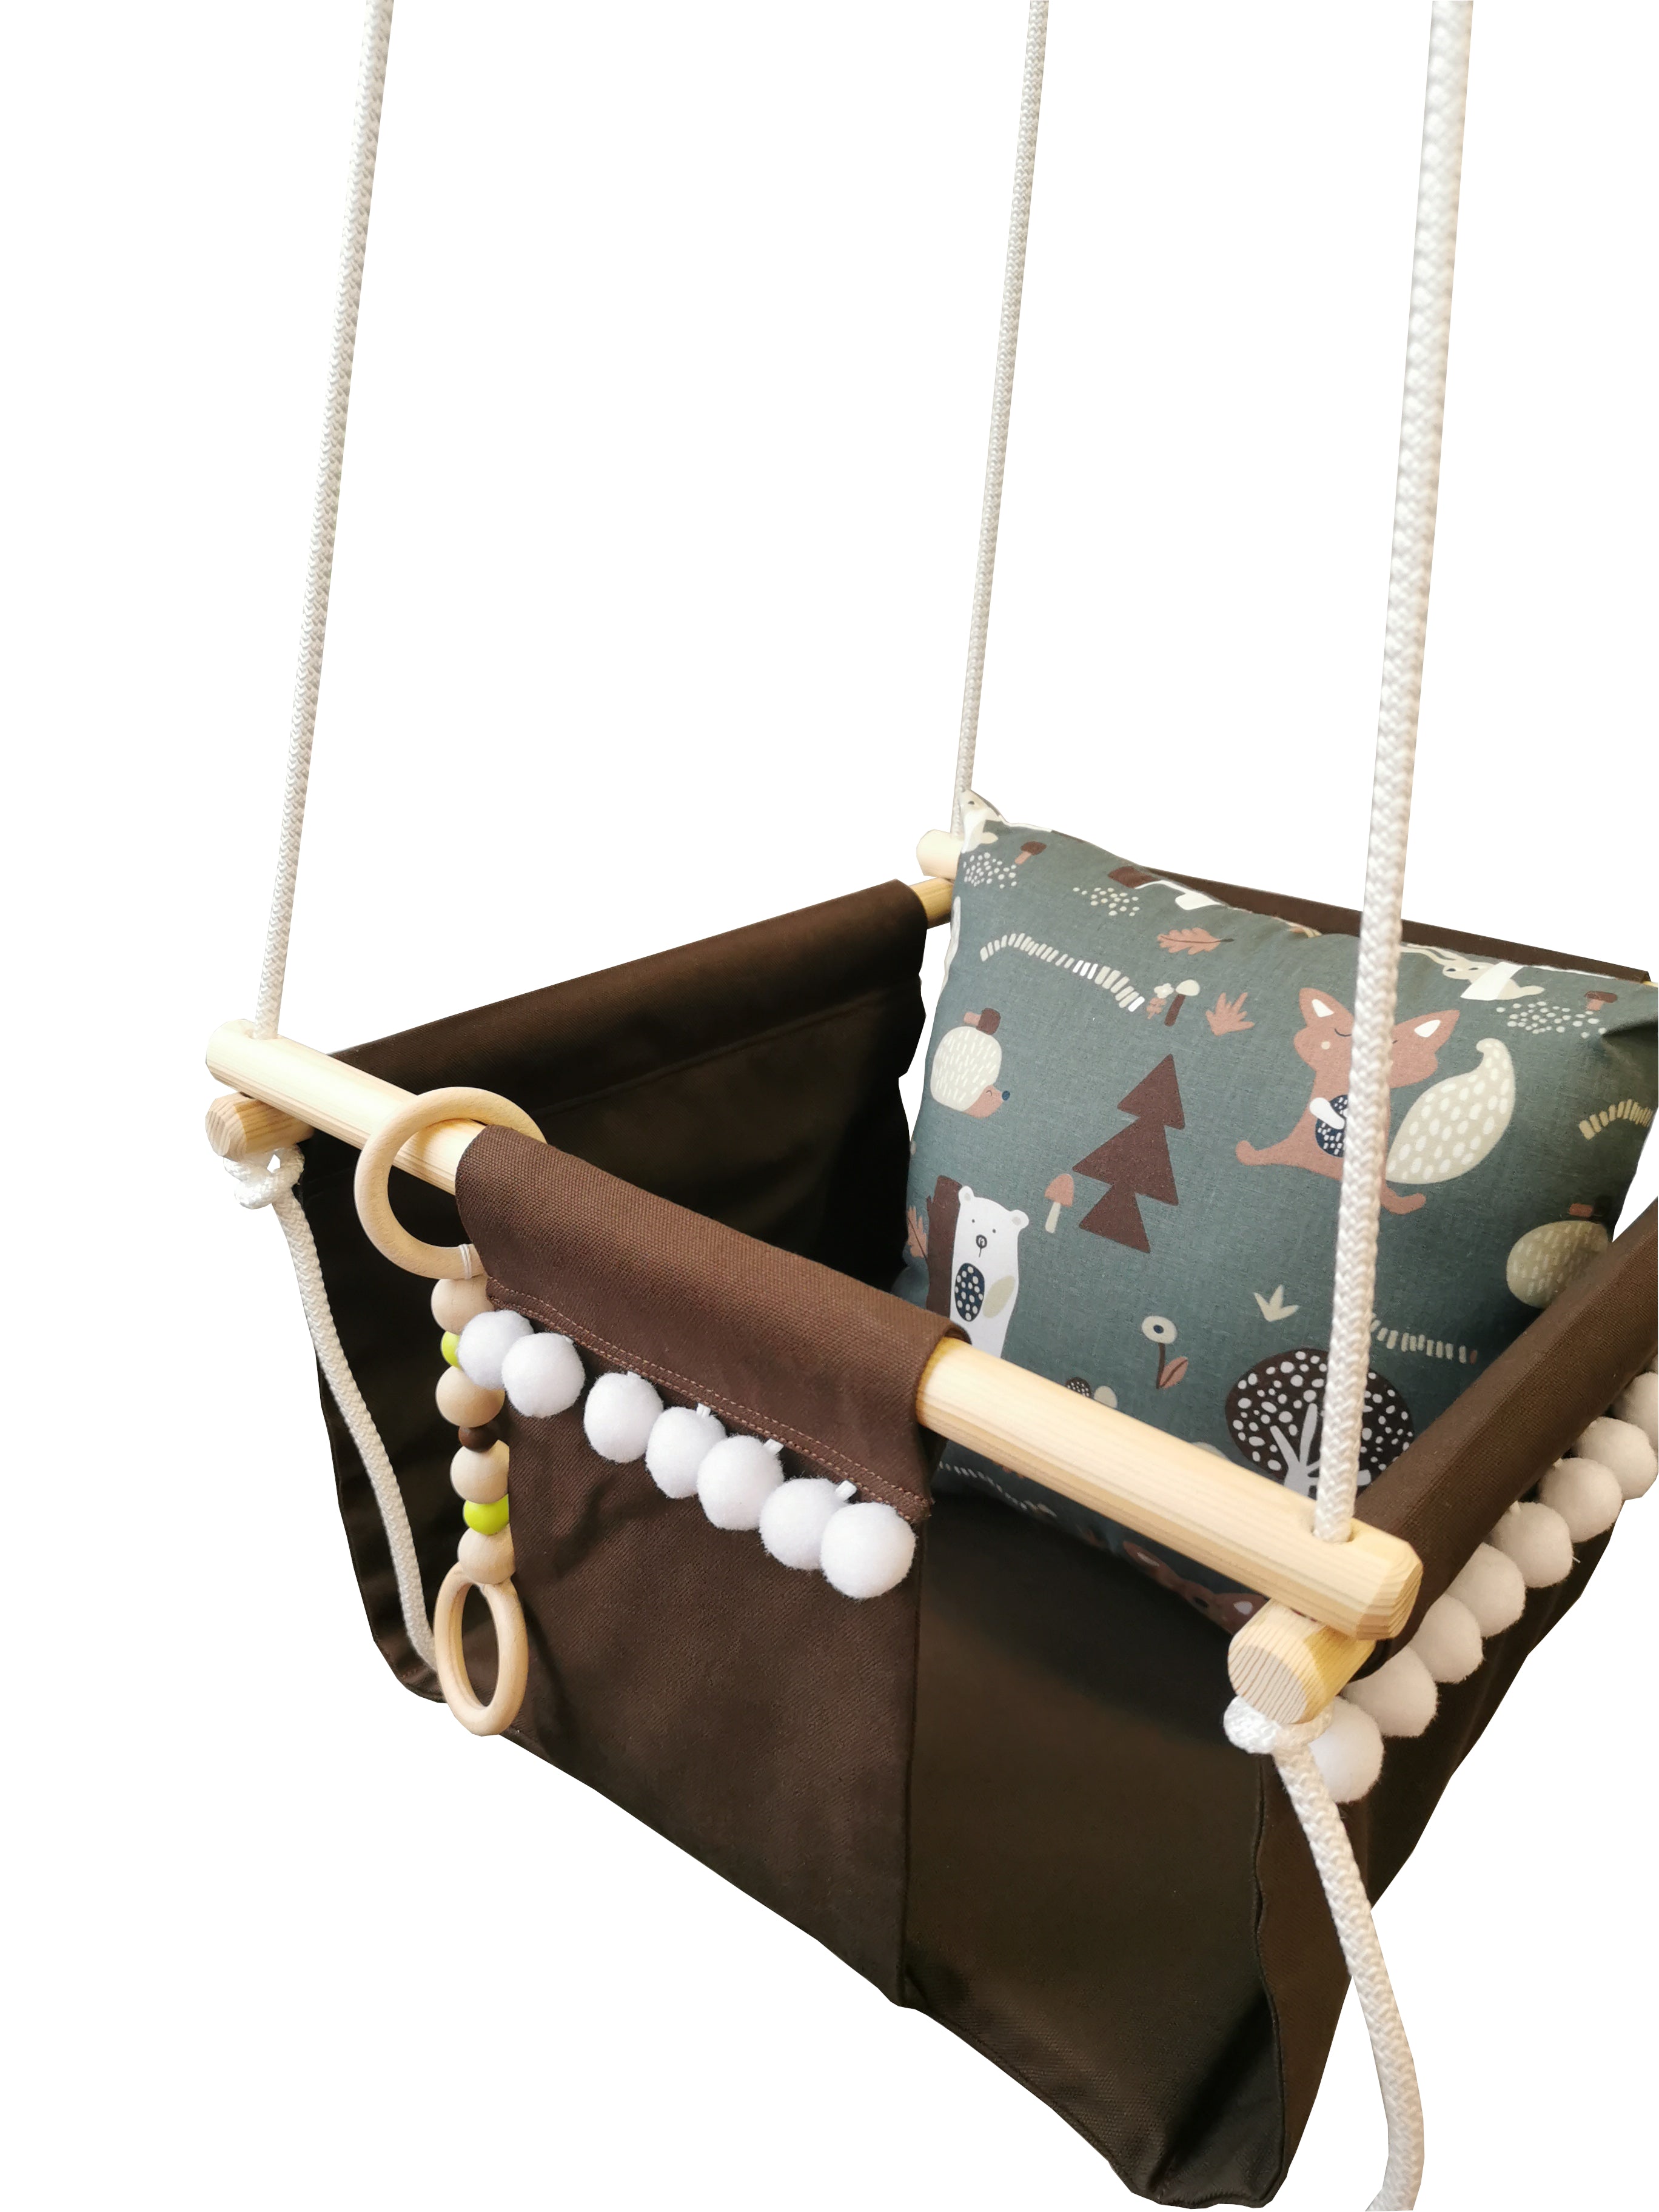 Swing for Kids "Squirrels"